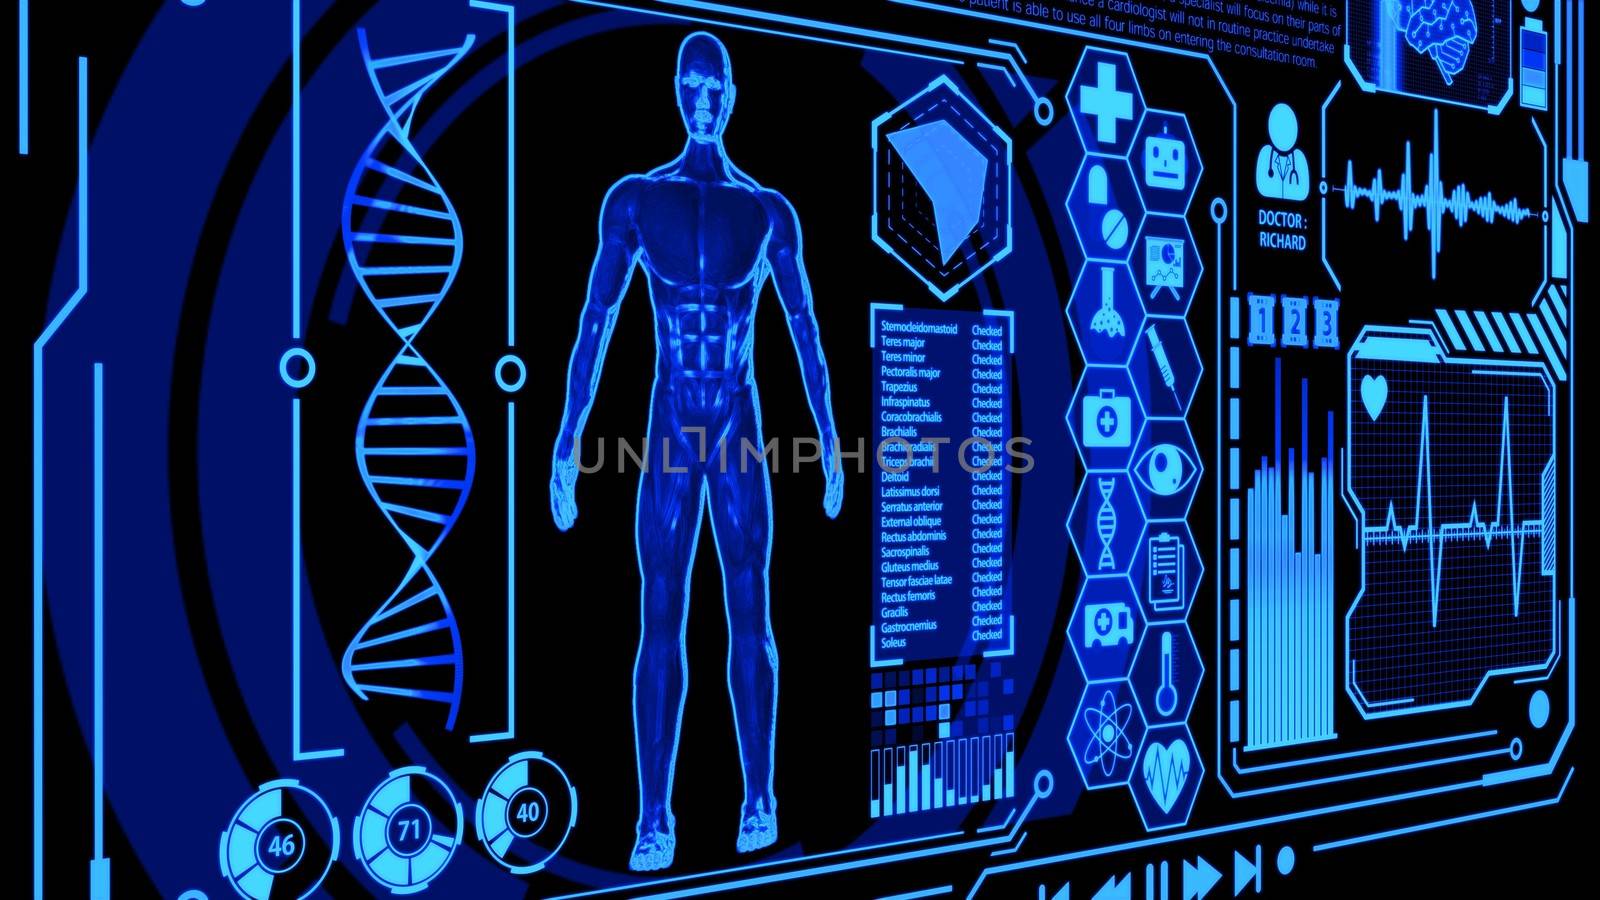 3D Human Model Rendering Rotating in Medical Futuristic HUD Display Screen including Icon sets, Digital Brain Scan, Heart Wave and more with Blue Color Still Image Ver.2